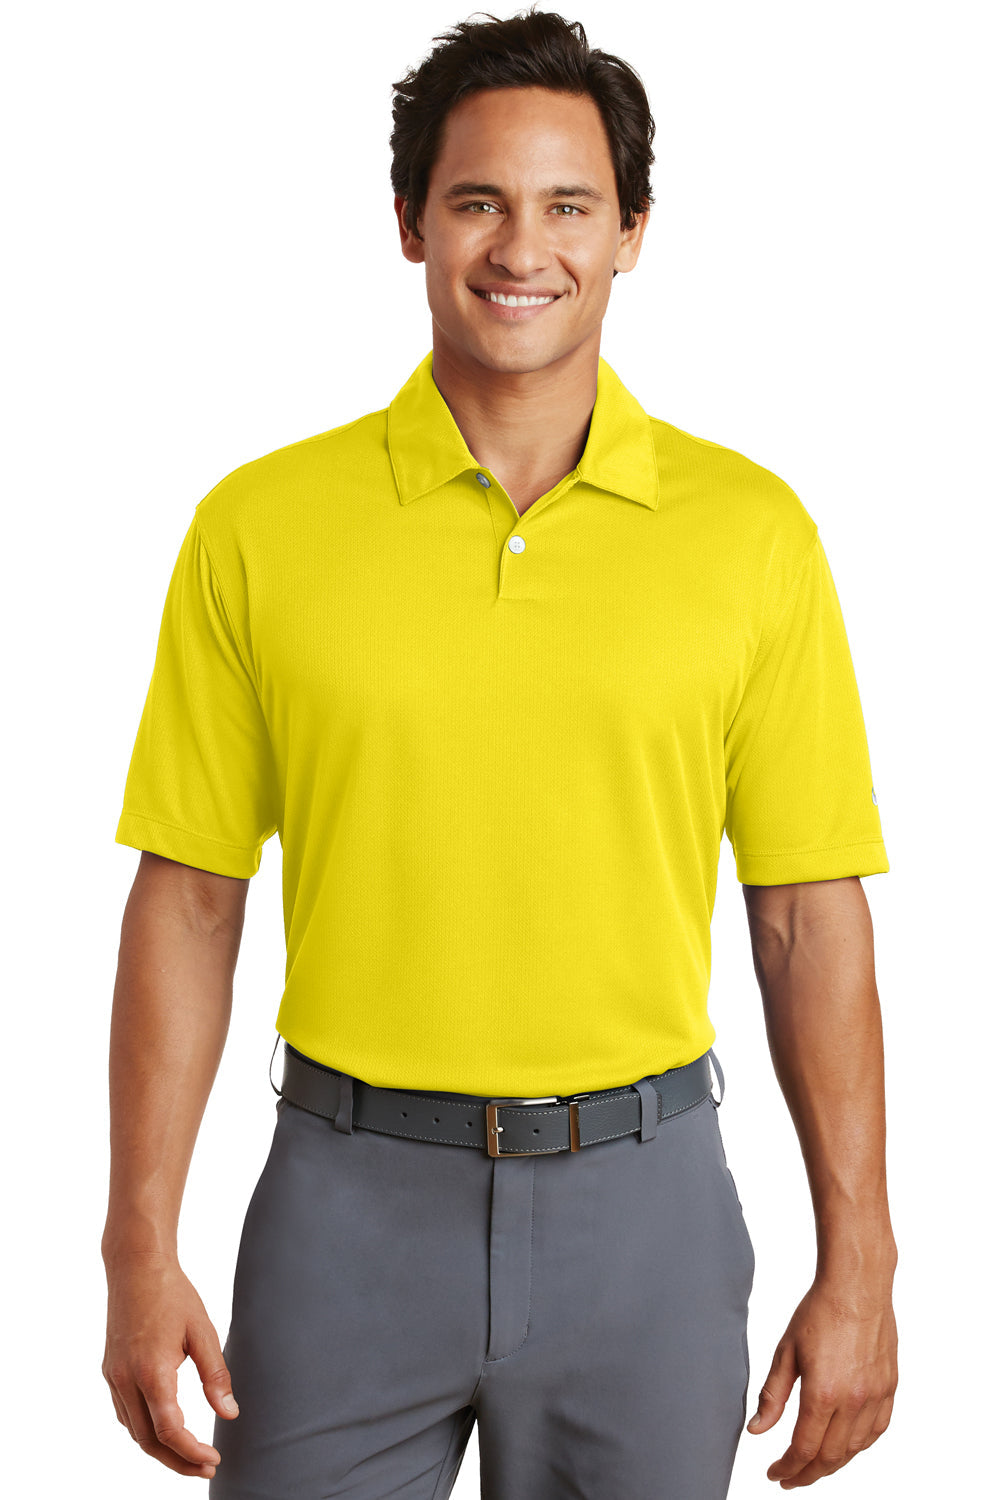 Nike Mens Dri-Fit Moisture Wicking Short Sleeve Polo Shirt - Tour Yellow (DISCONTINUED)